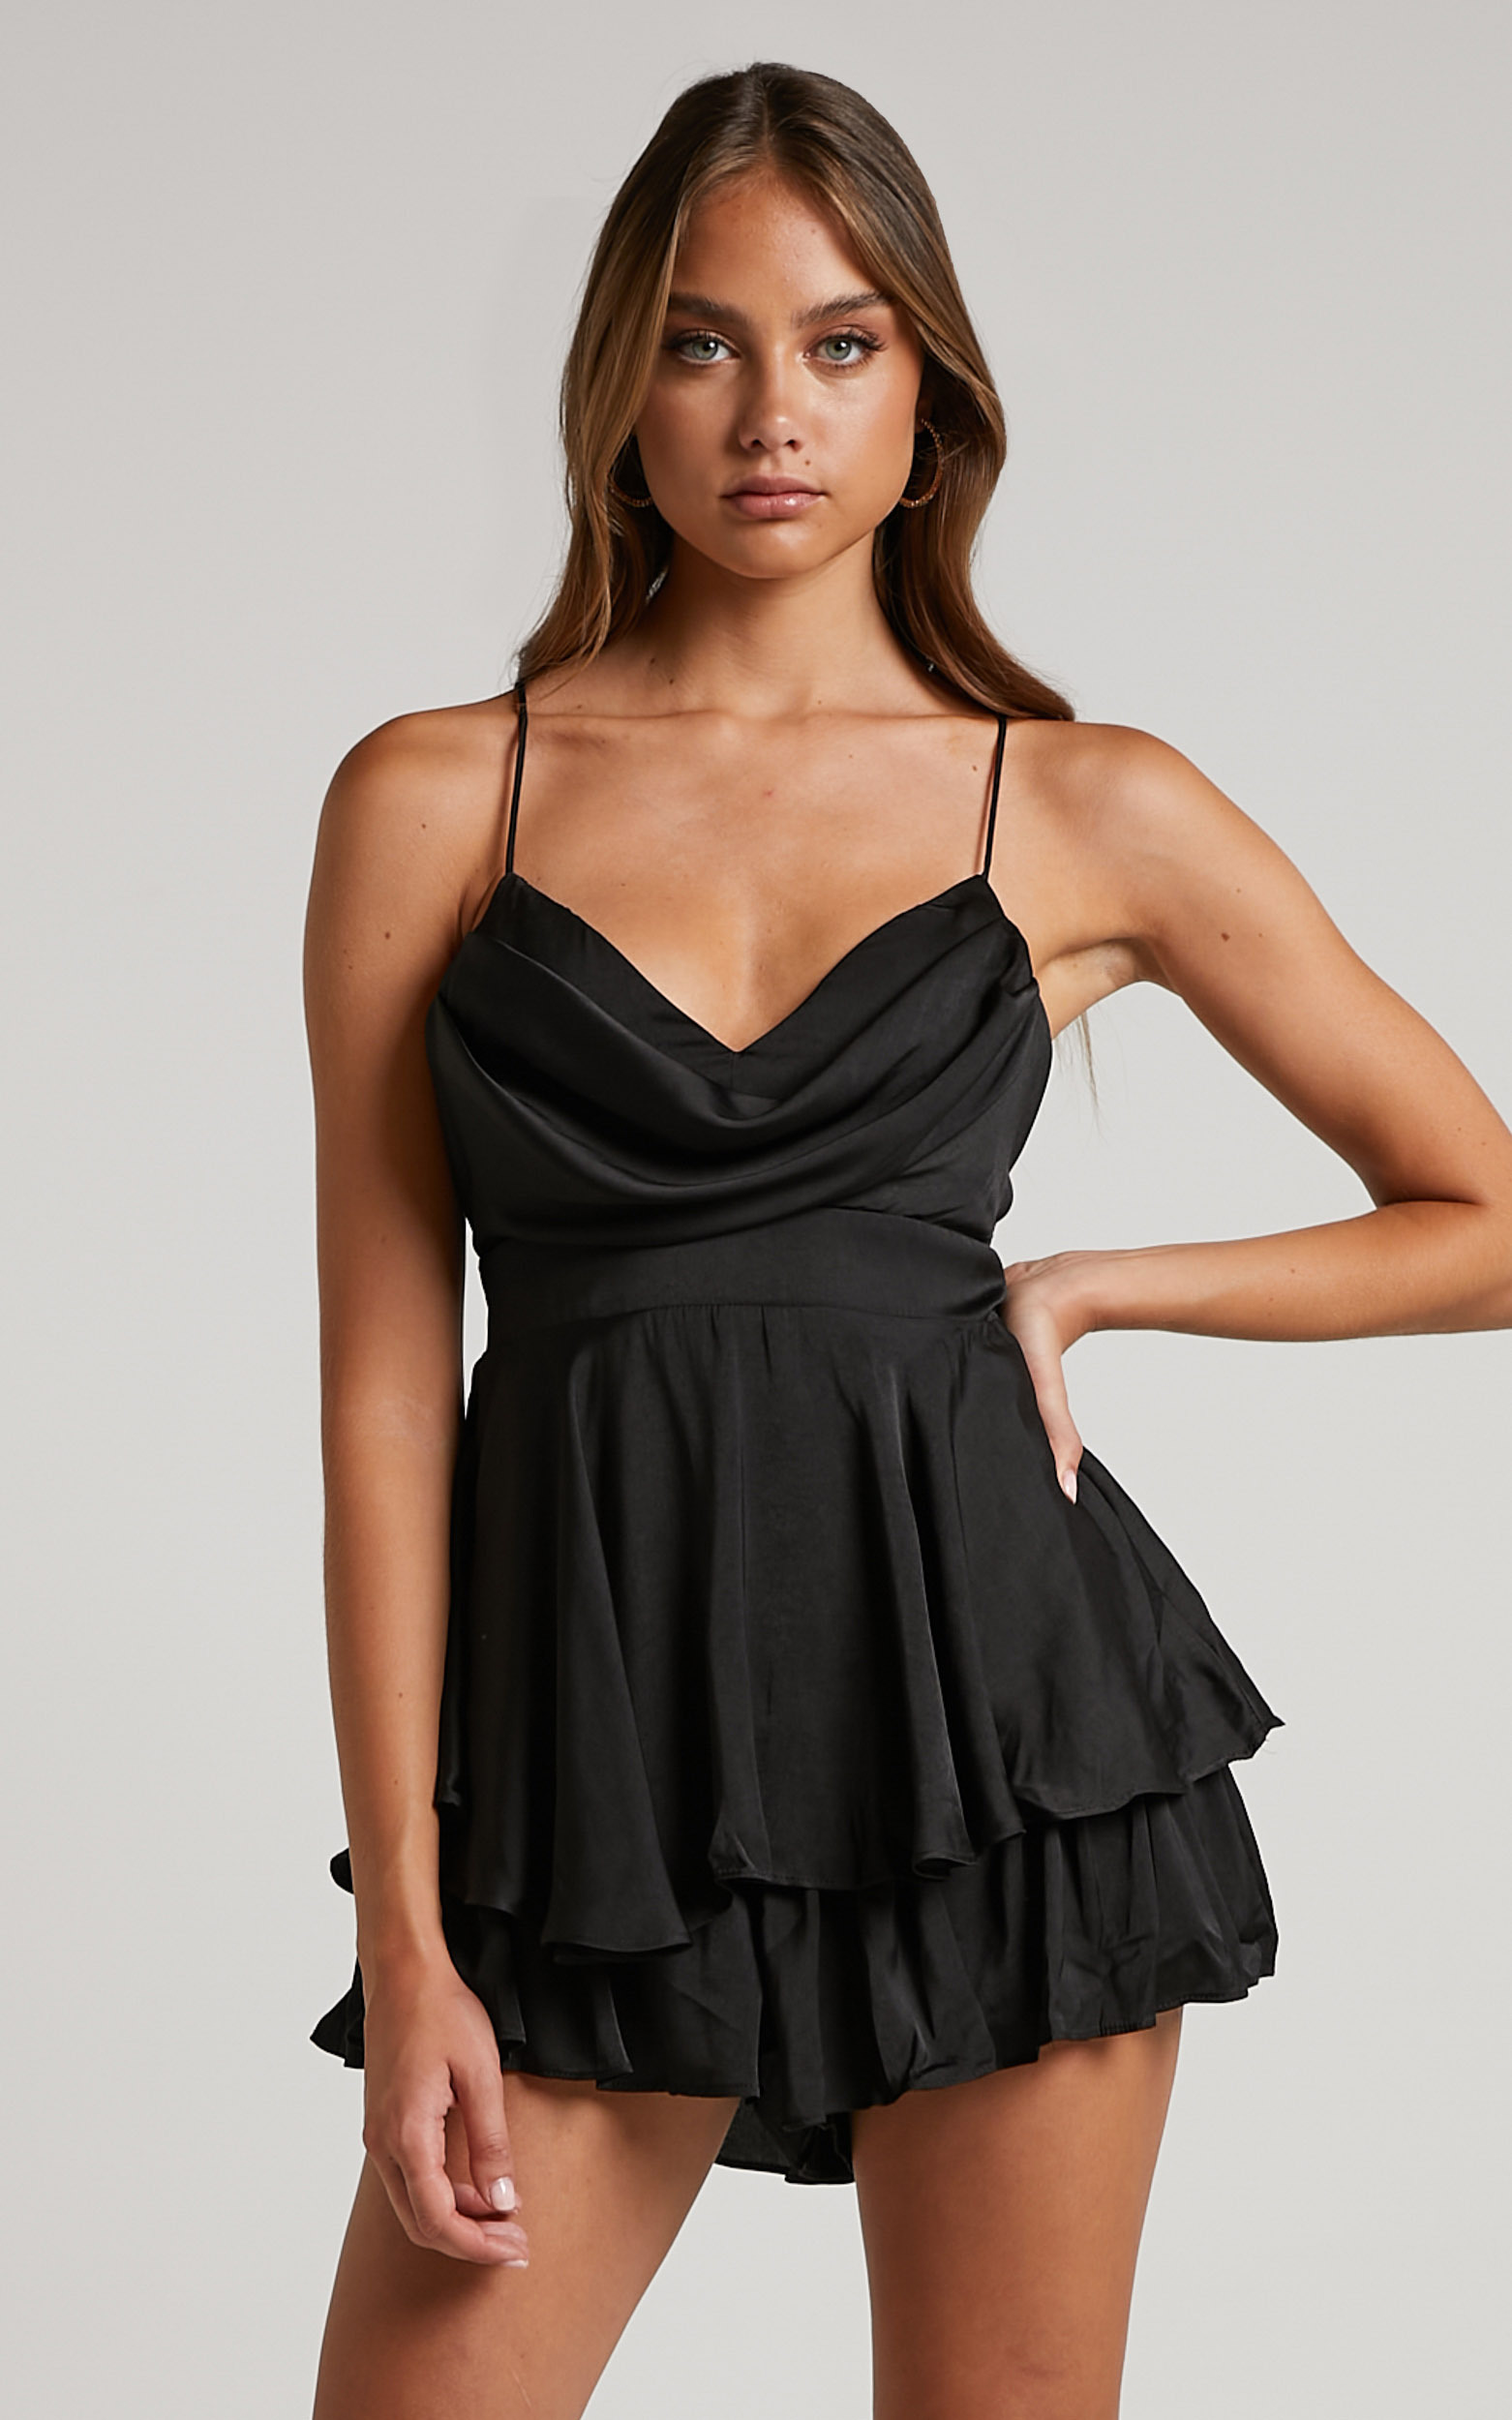 Delany Cowl Neck Layered Frill Playsuits in Black - 06, BLK1, hi-res image number null